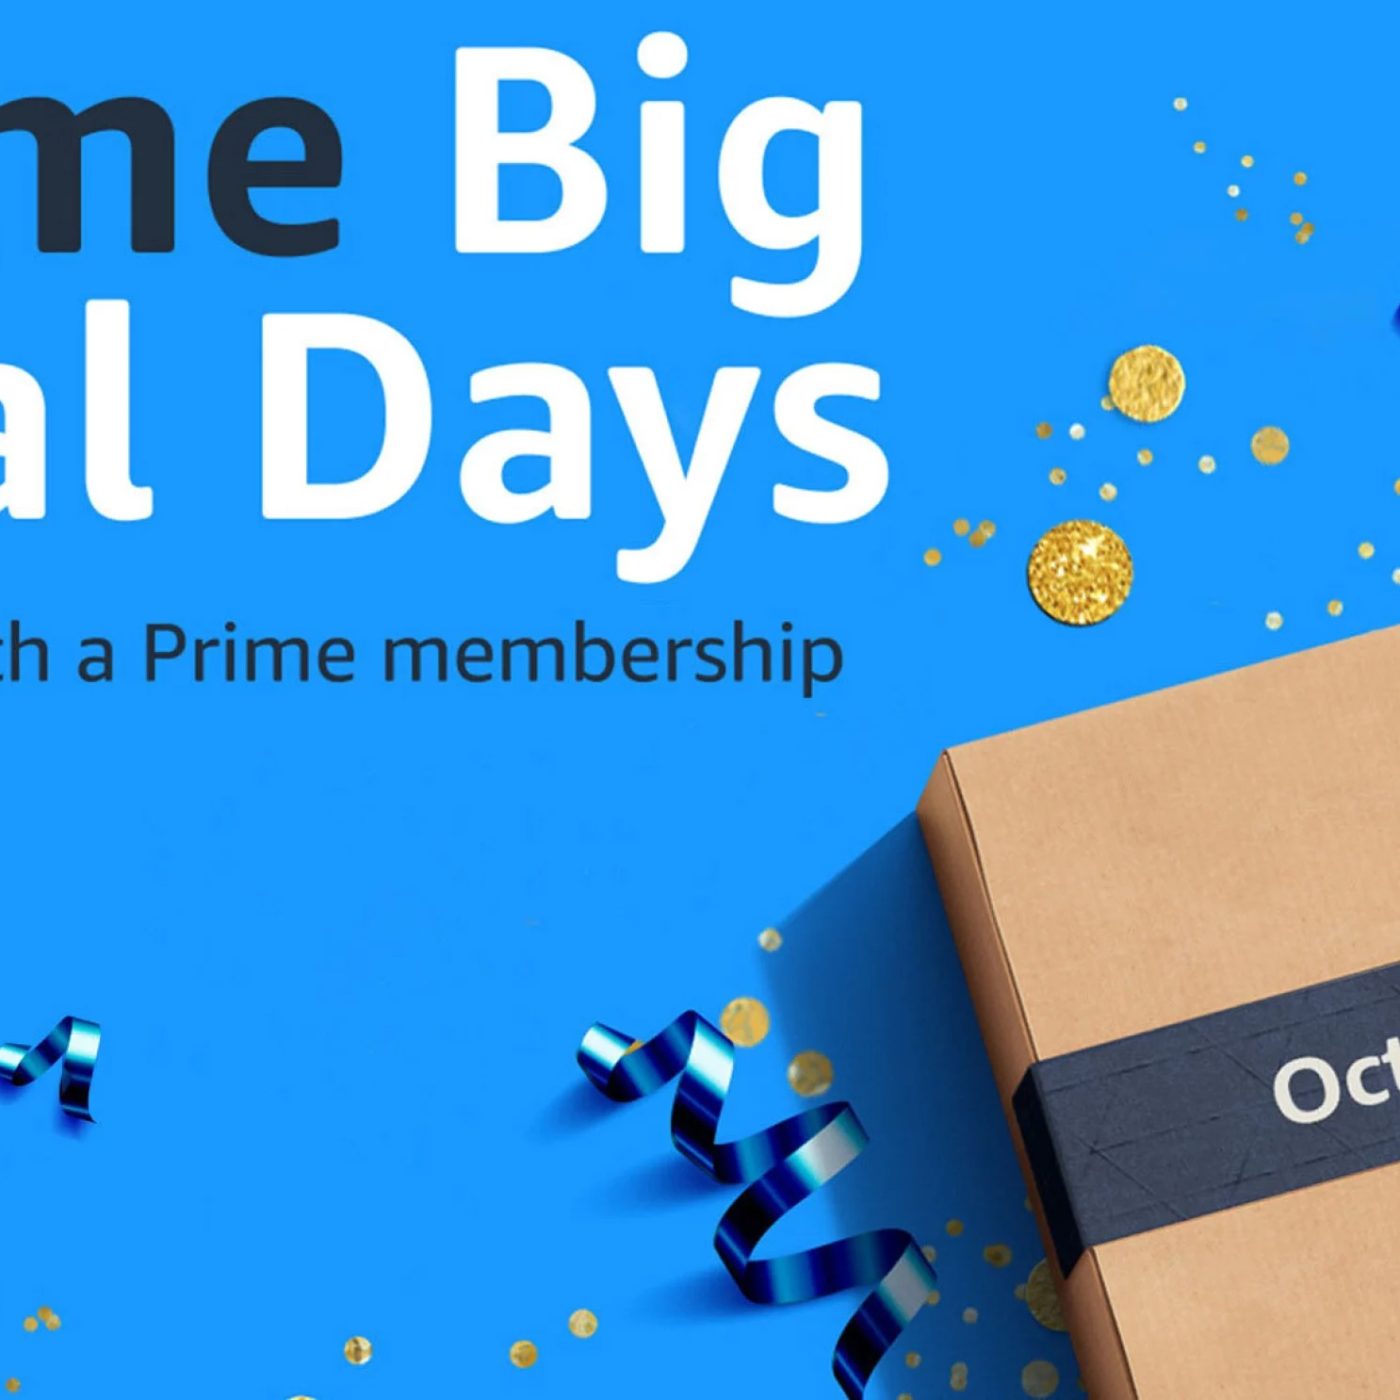 Prime Big Deal Days 2023: Best deals at the lowest prices